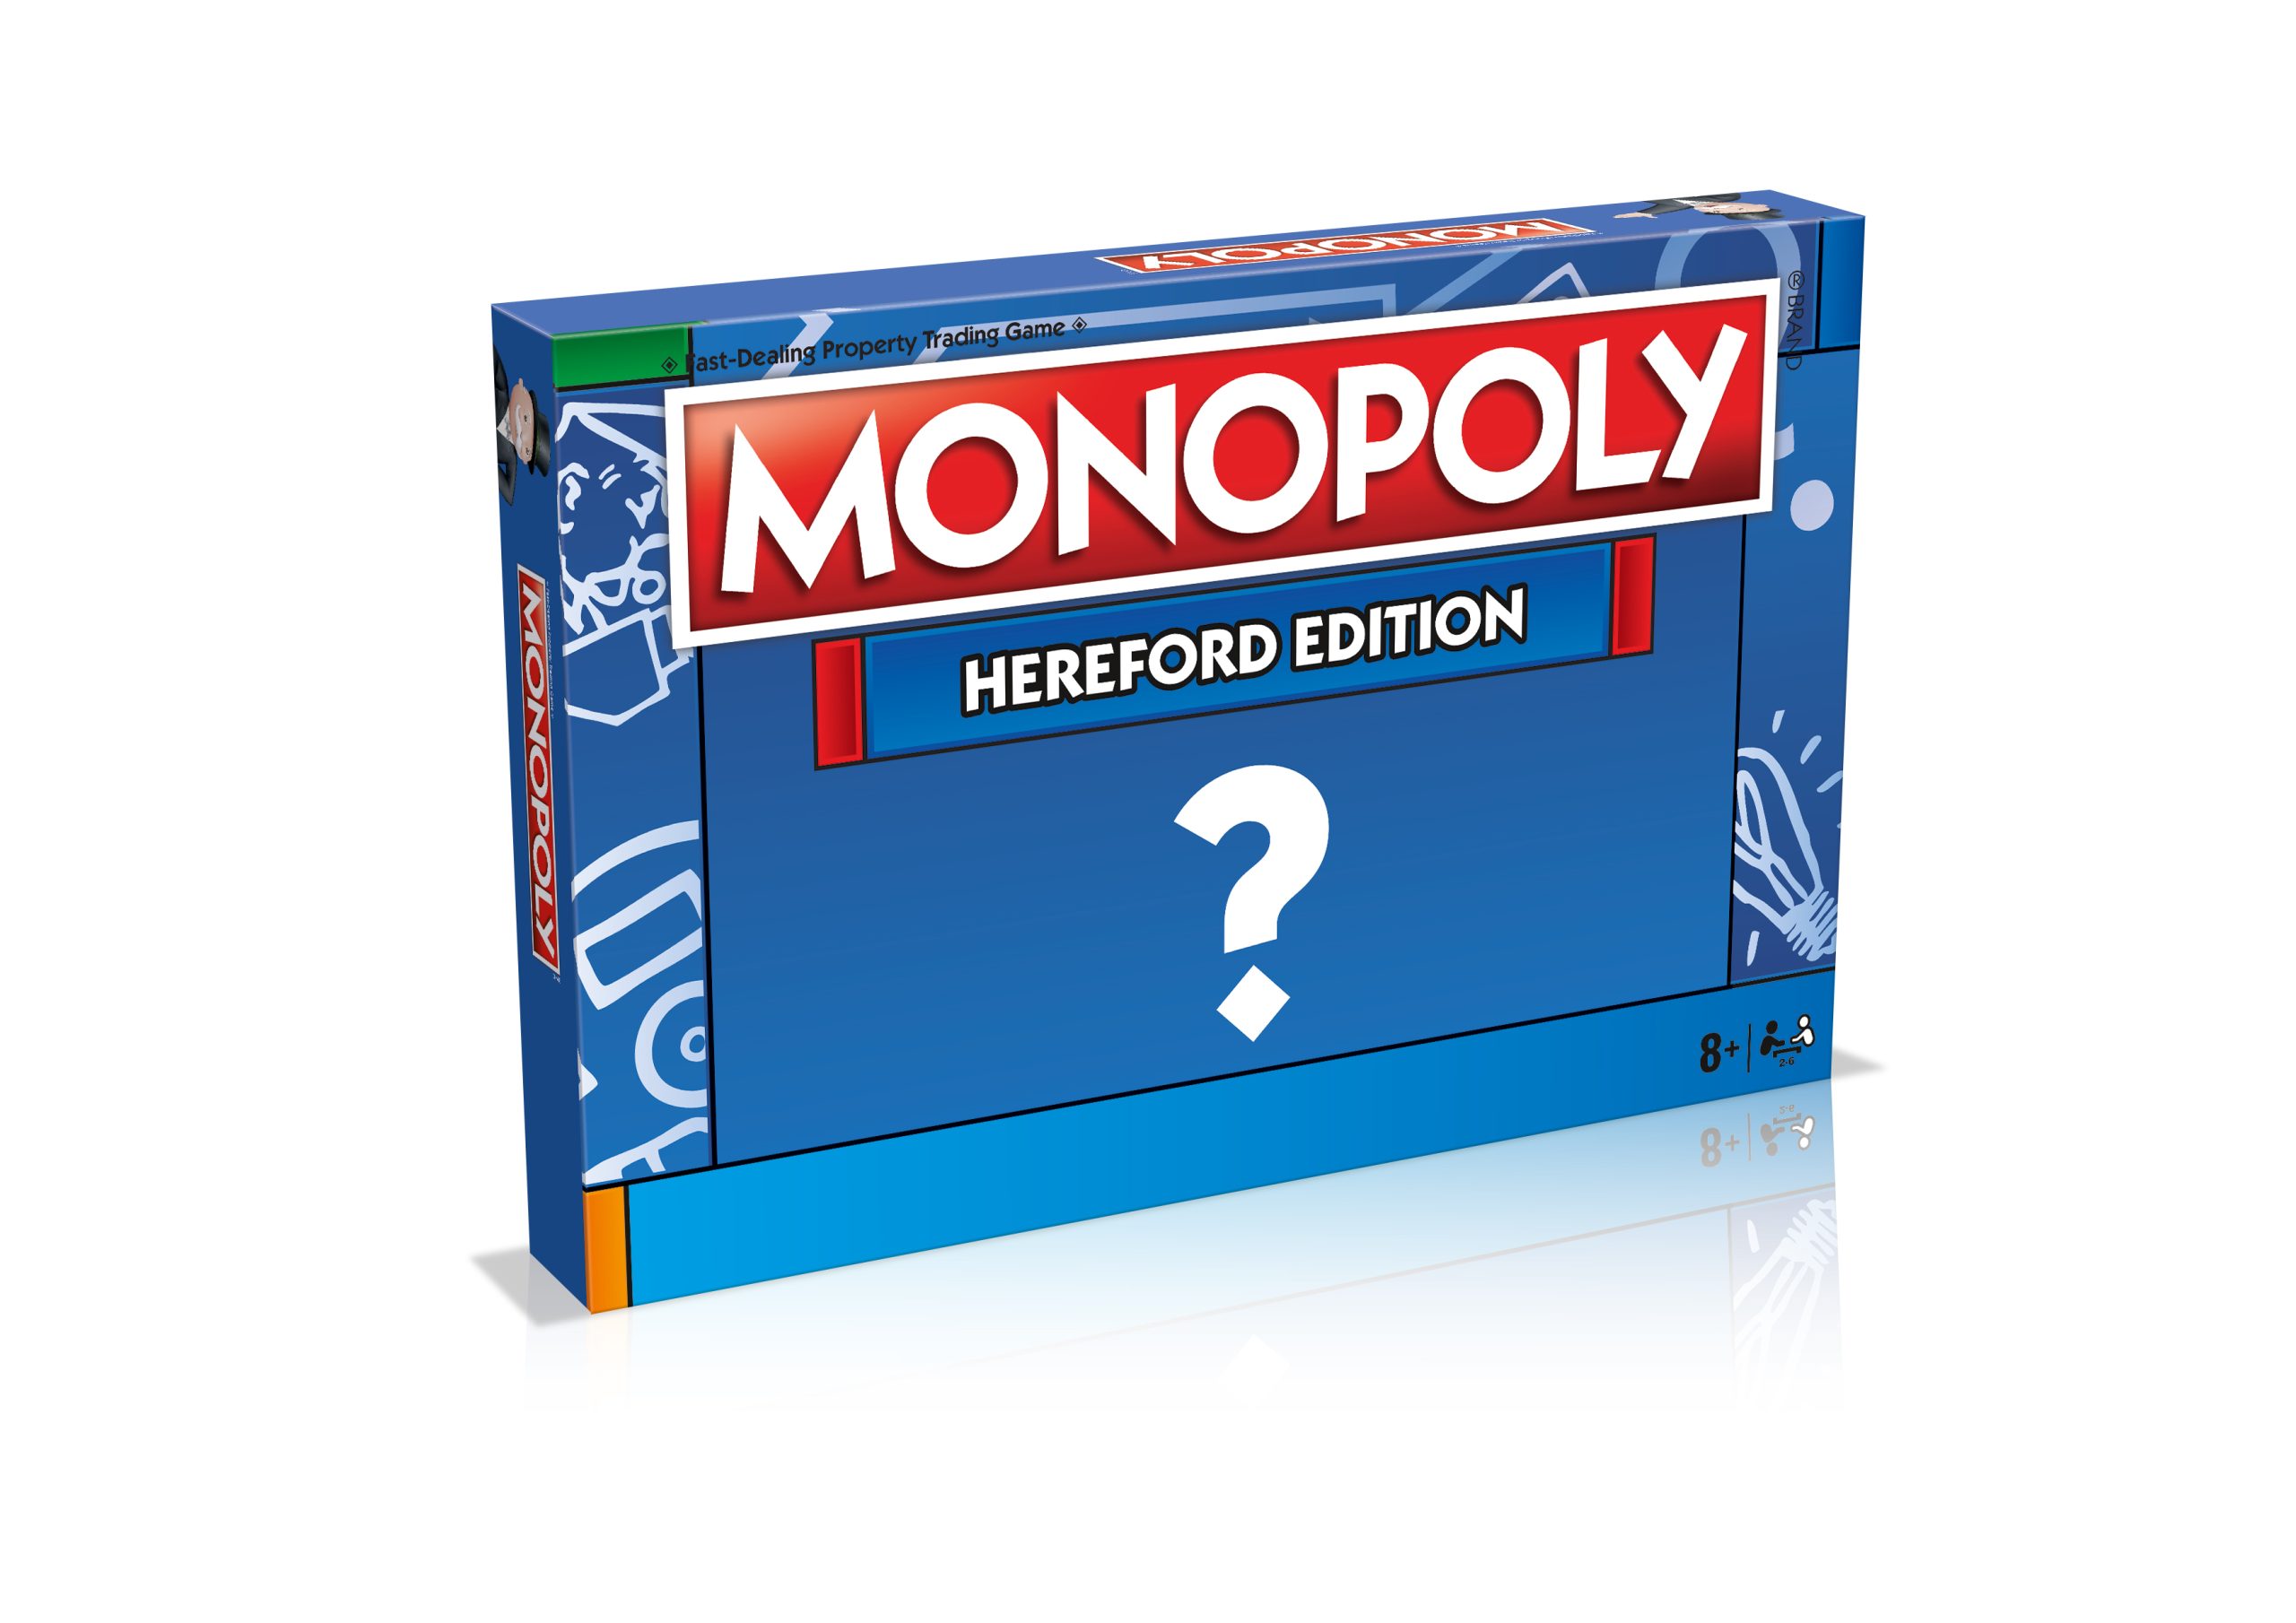 NEWS | Hereford public calls for Monopoly players to be ‘Sent to Worcester’ rather than the Monopoly jail on new board